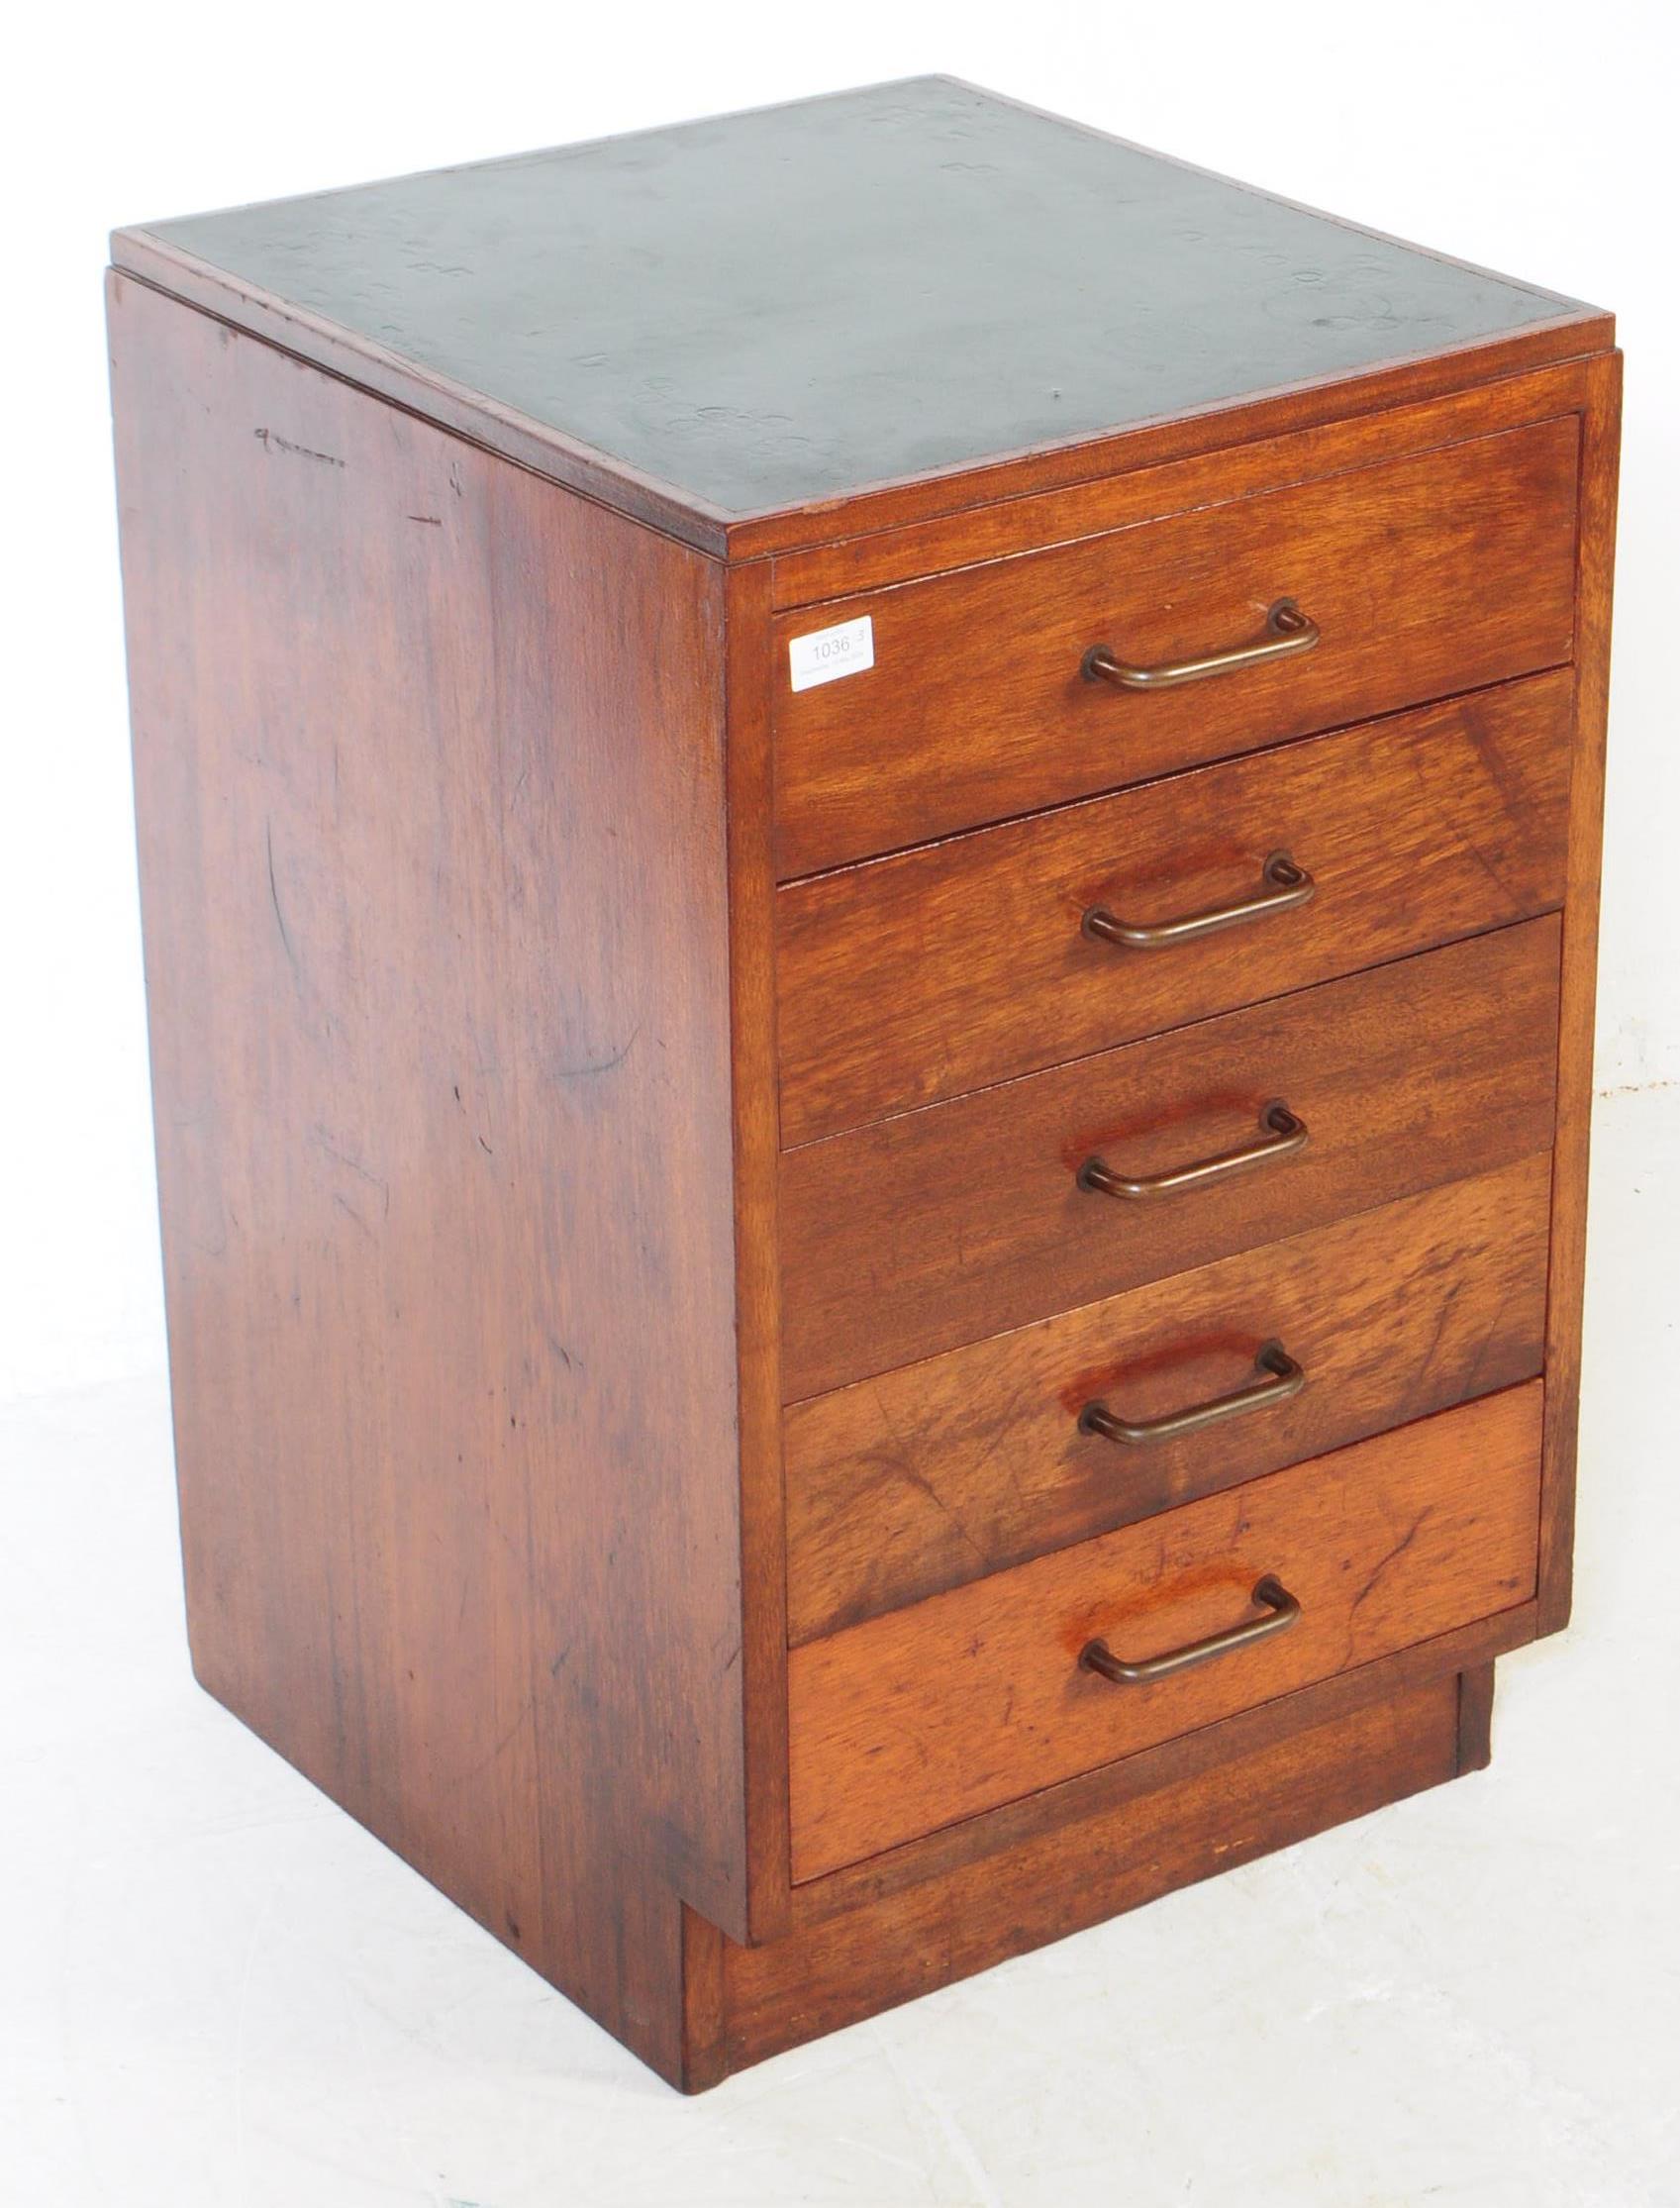 MINISTRY OF DEFENCE OAK PEDESTAL CHEST OF DRAWERS - Image 2 of 6